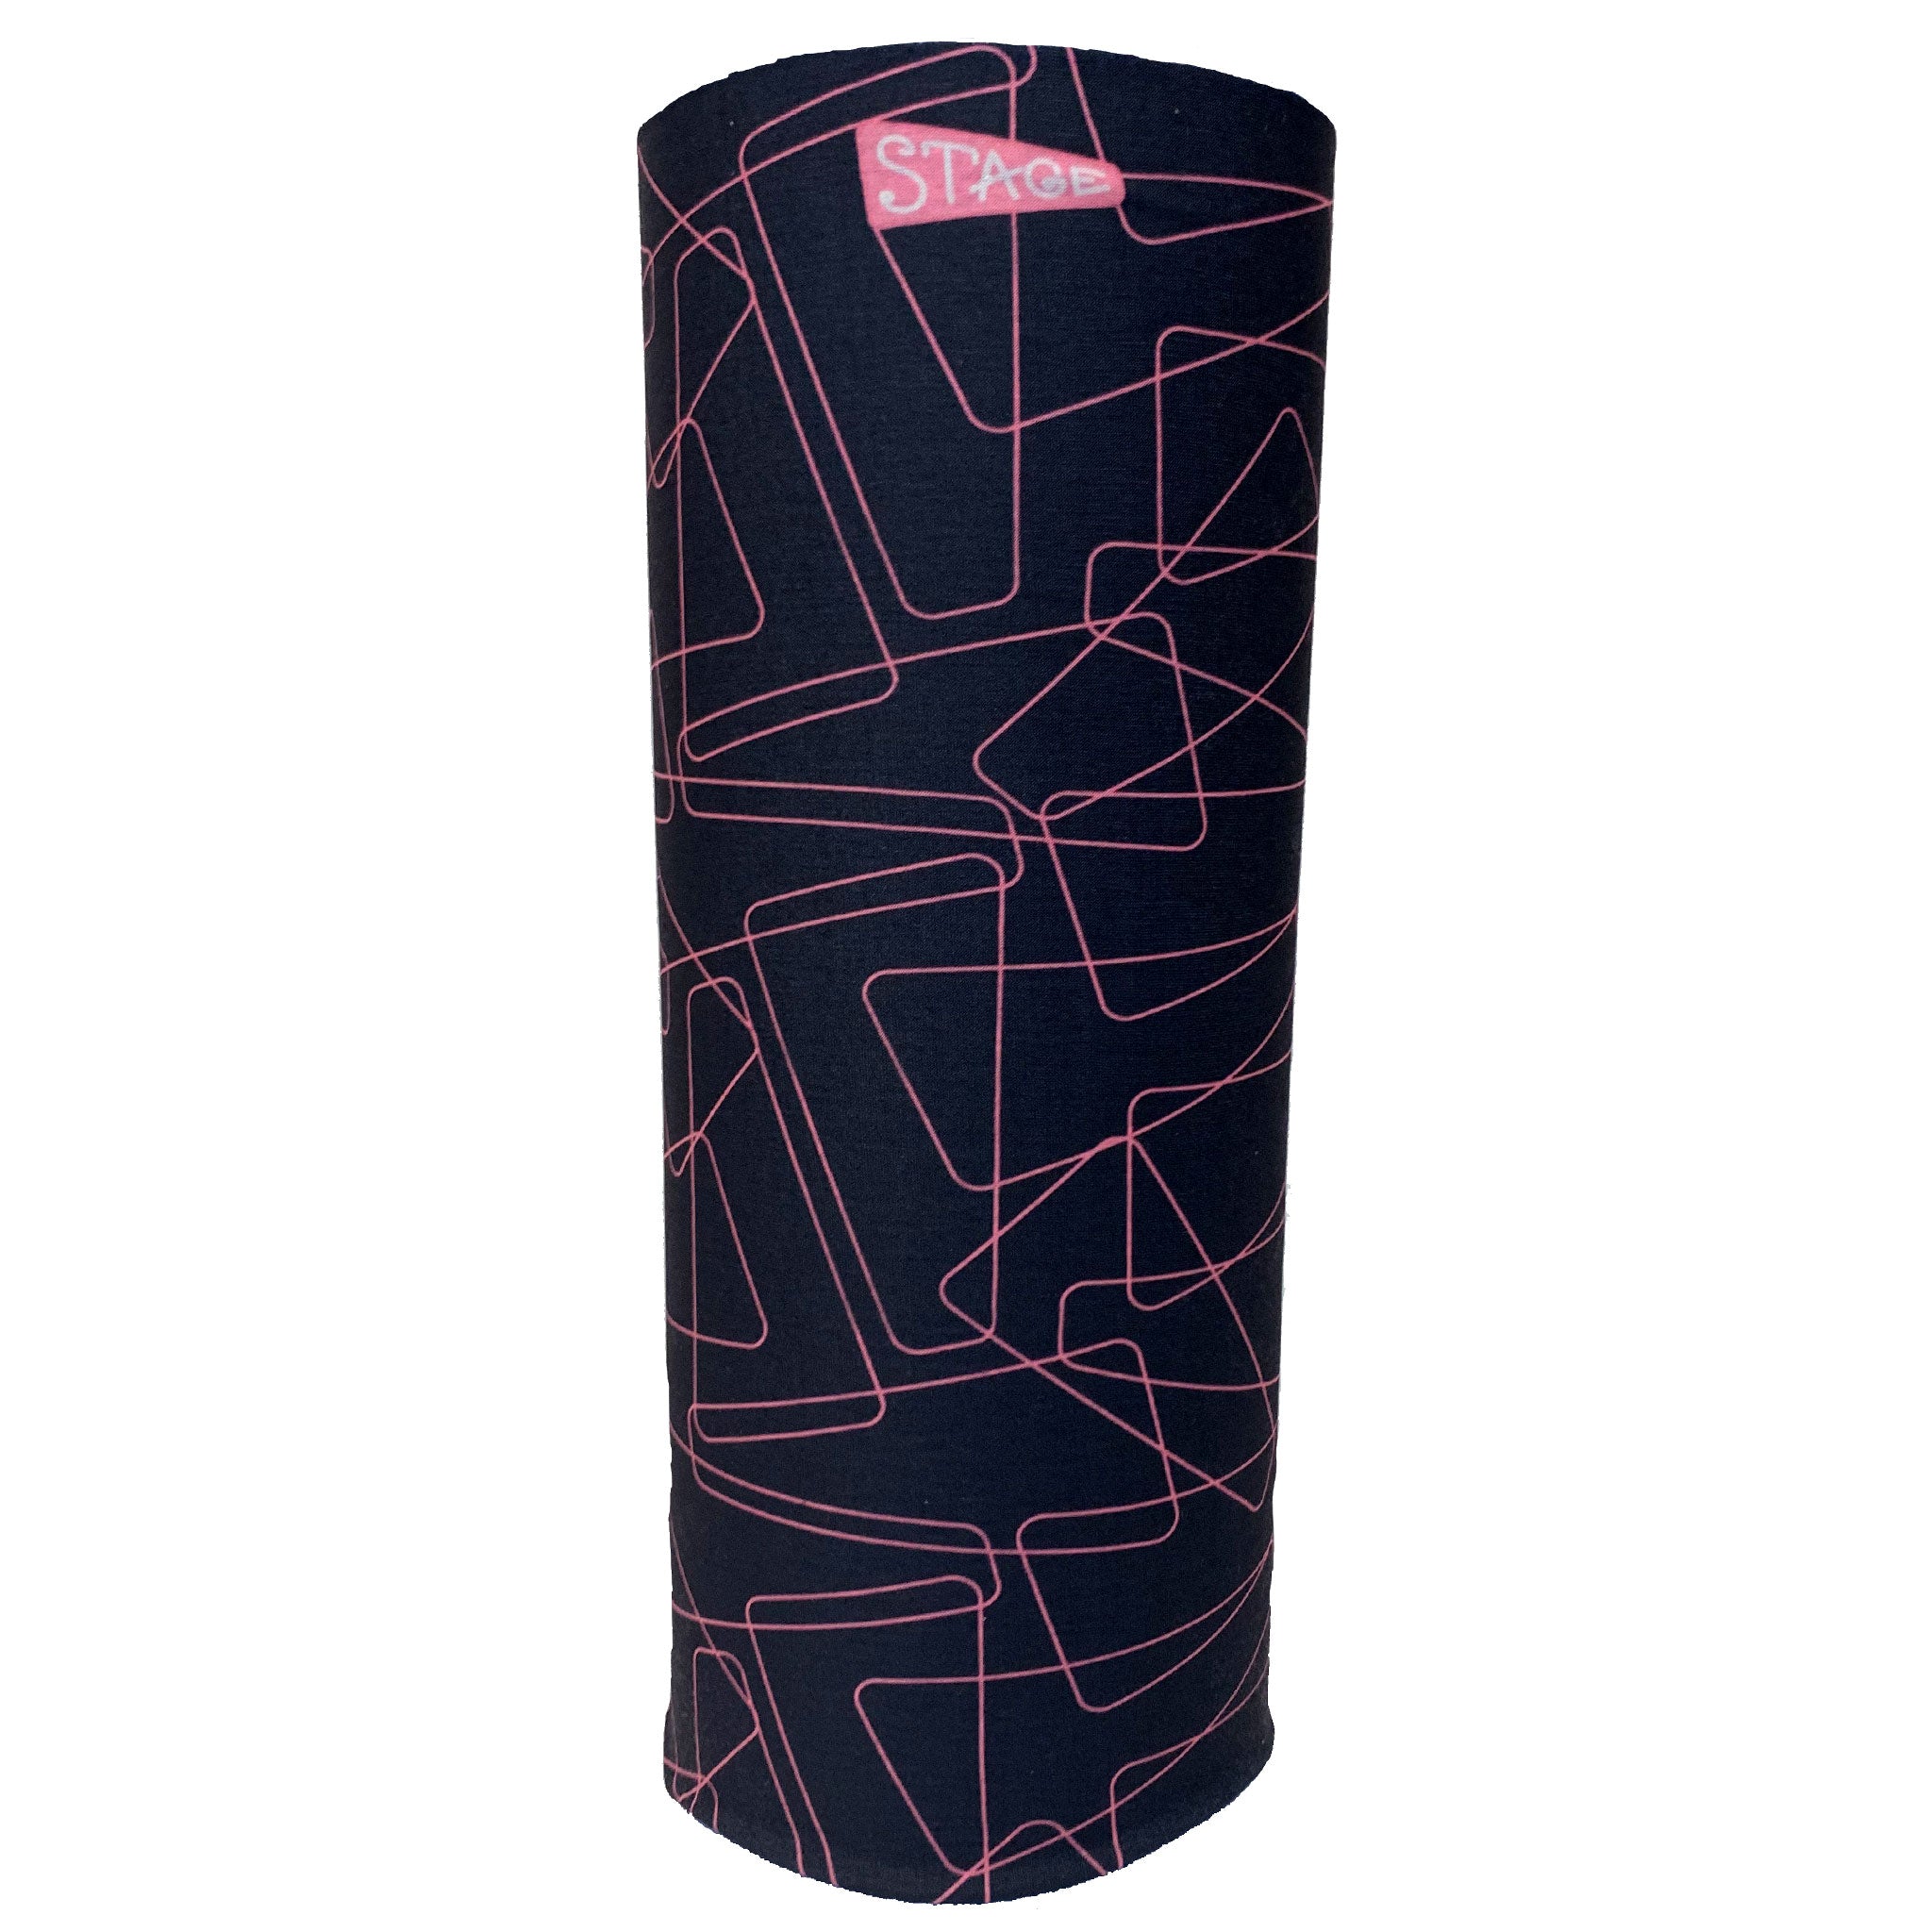 Jr. Fleece Face Tube - Zoid Pink - Jr. Small (Ages 4-7)